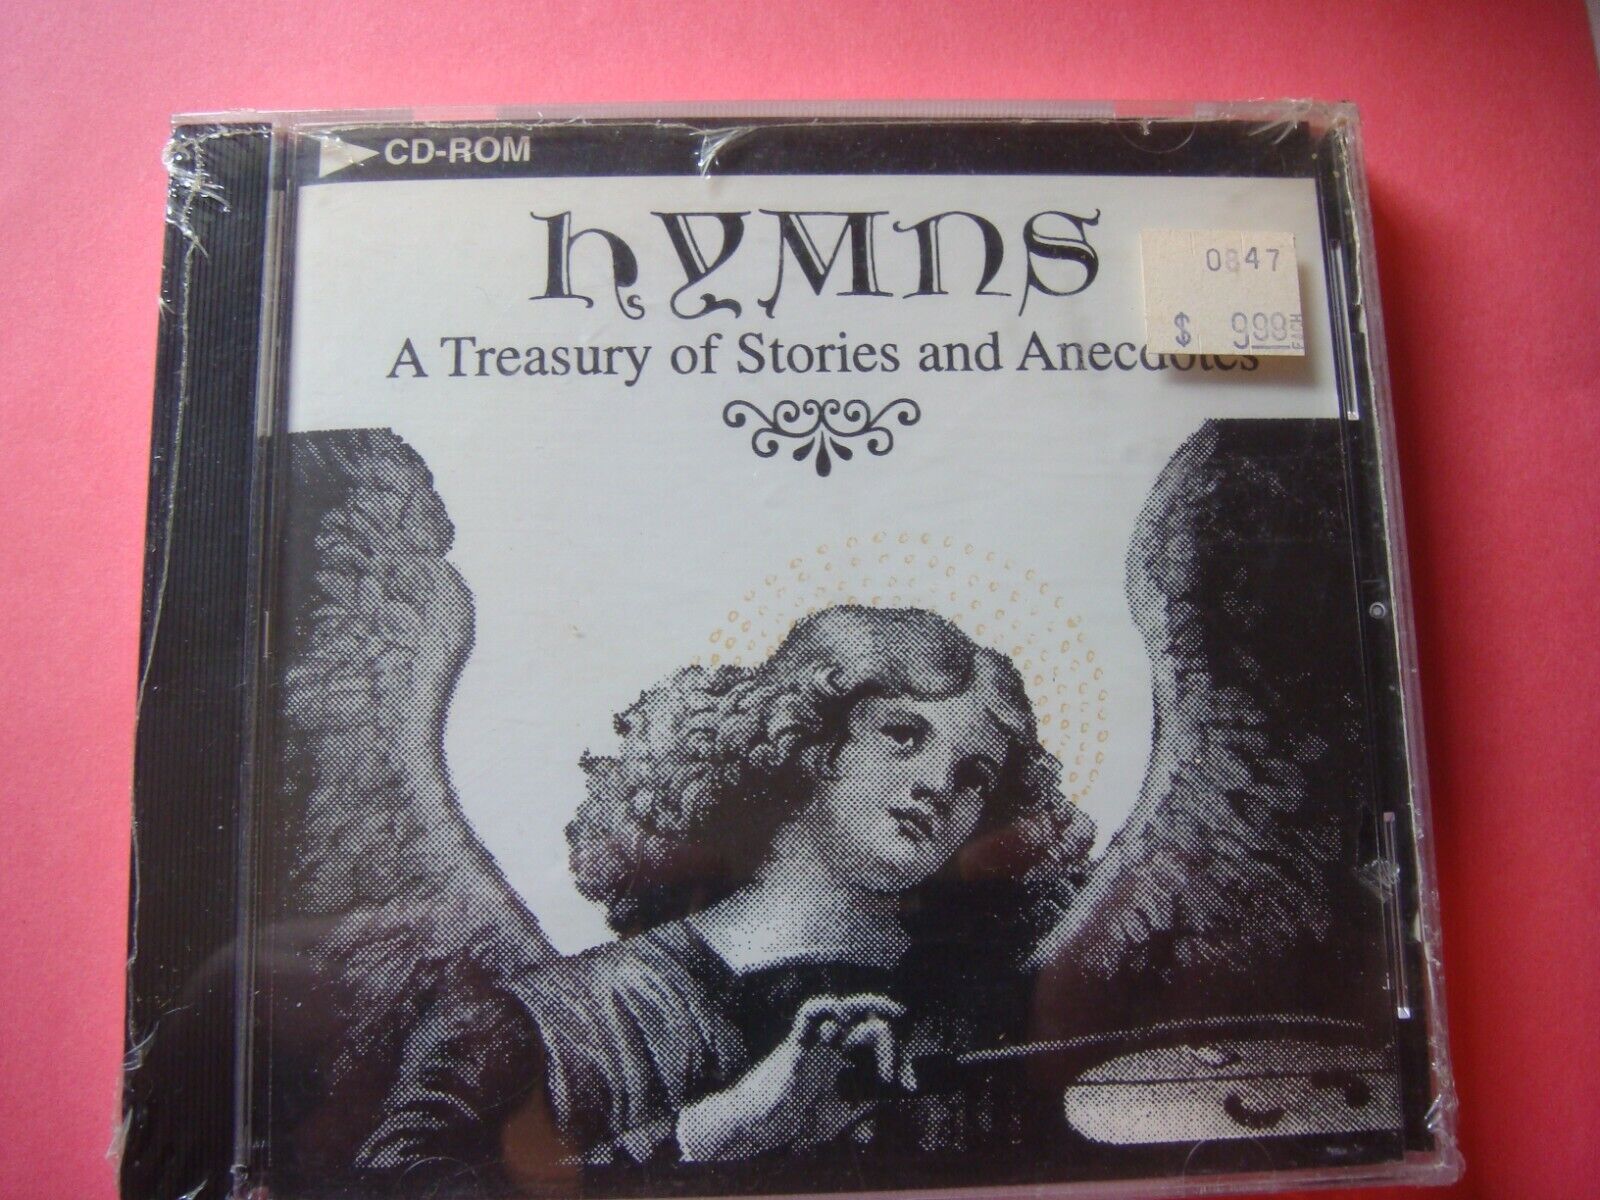 Vintage Software  Hymns A Treasury of Stories and Anecdotes CD-Rom  circa 1994